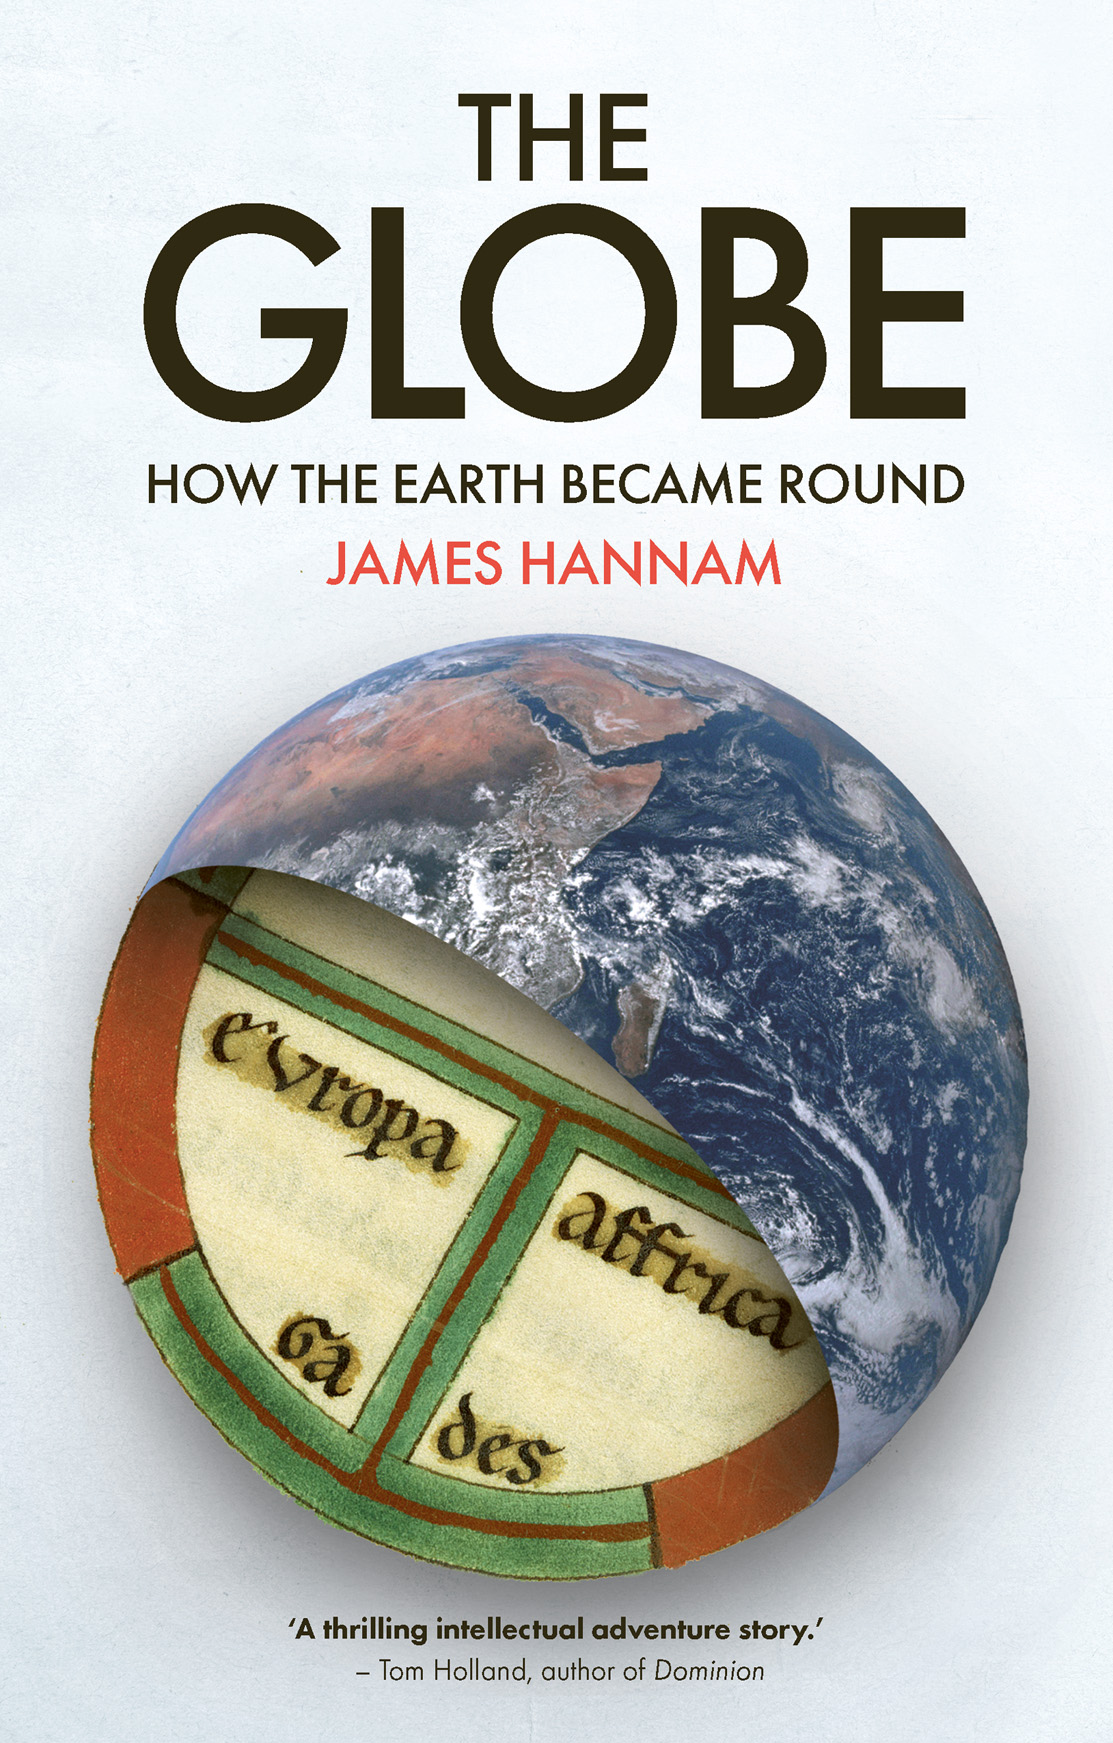 The Globe by James Hannam